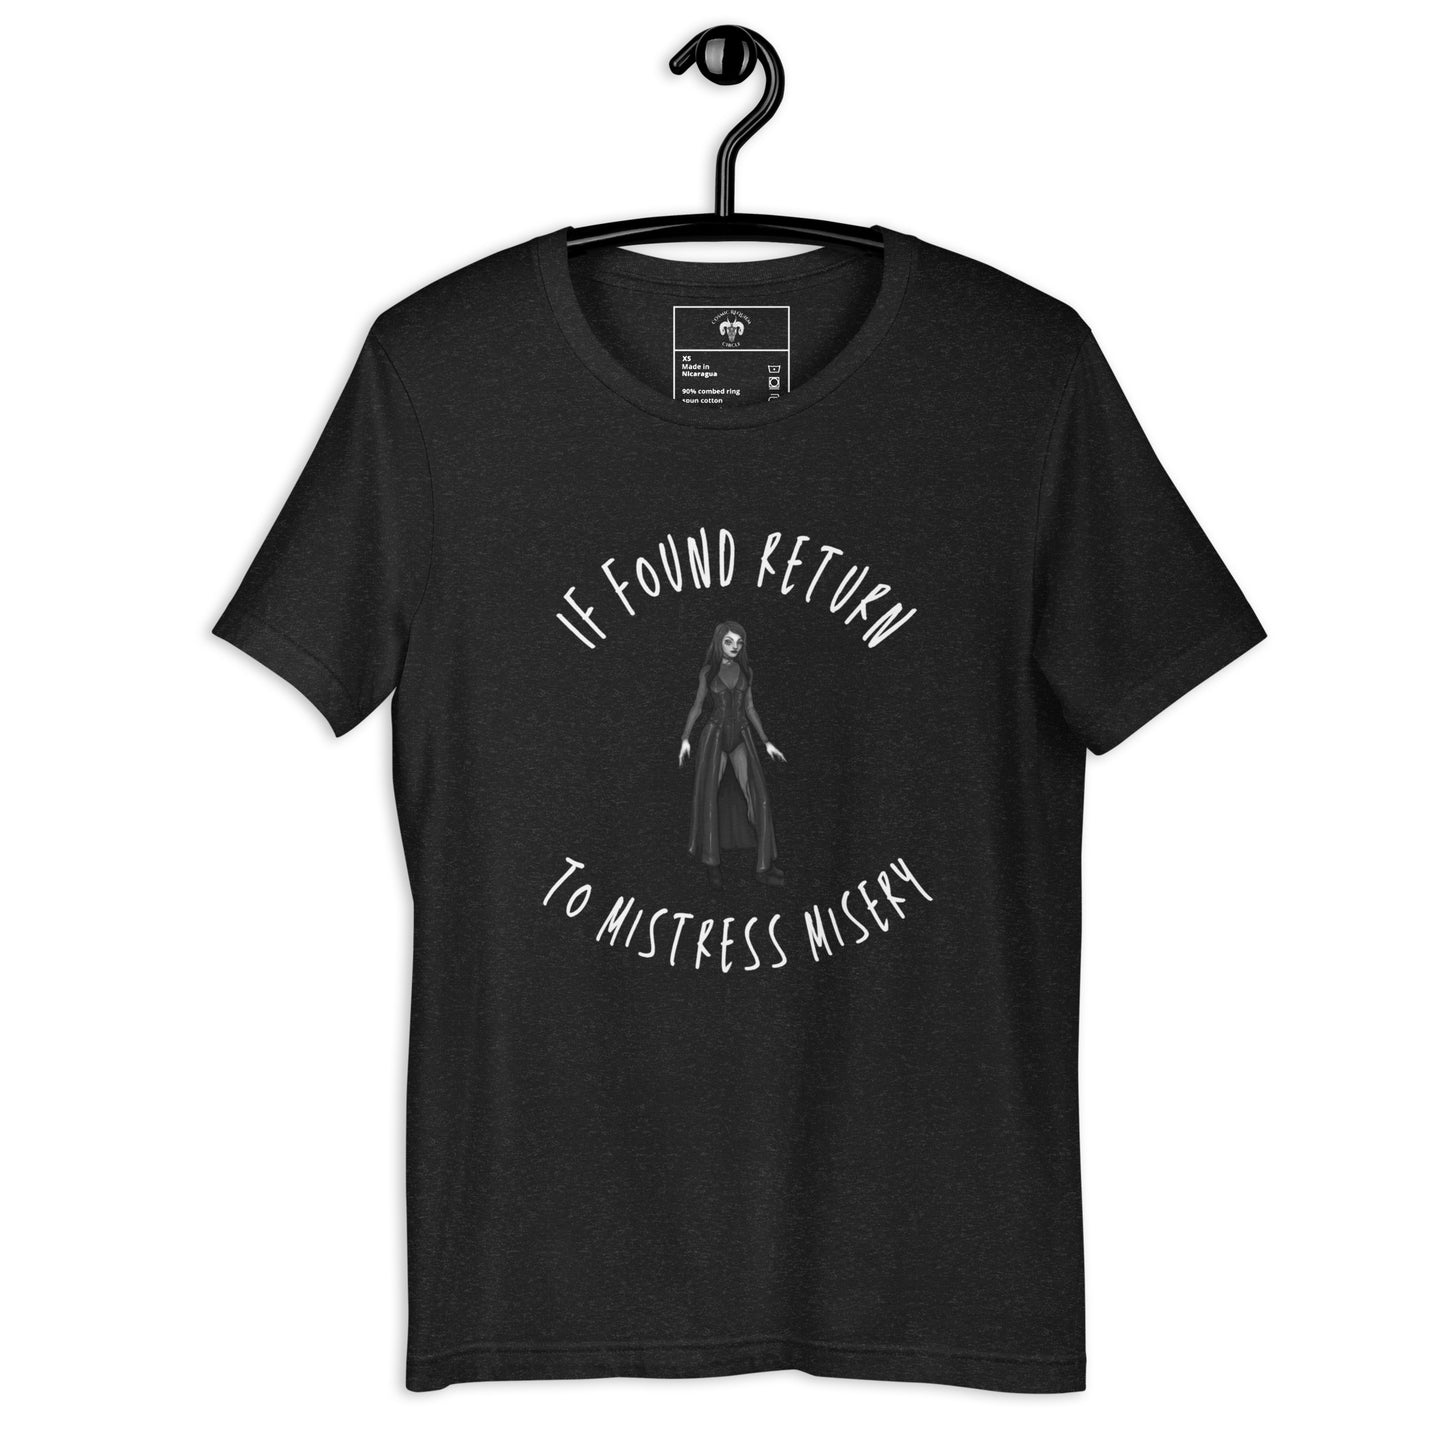 If Lost Return to Mistress Misery Unisex t-shirt